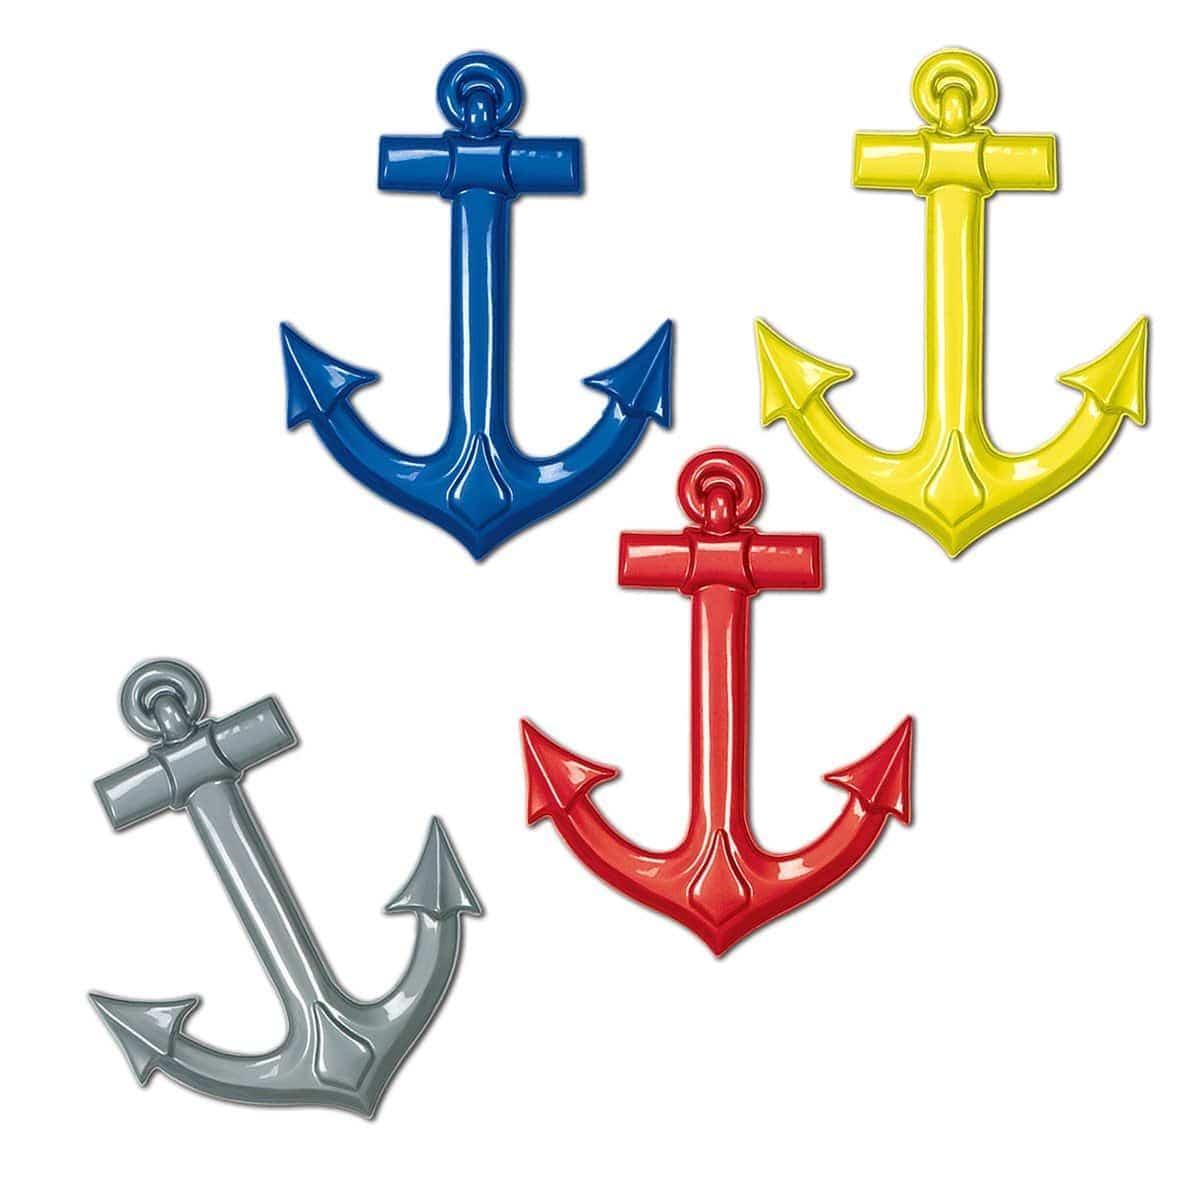 Buy Theme Party Plastic Anchor - Assortment sold at Party Expert